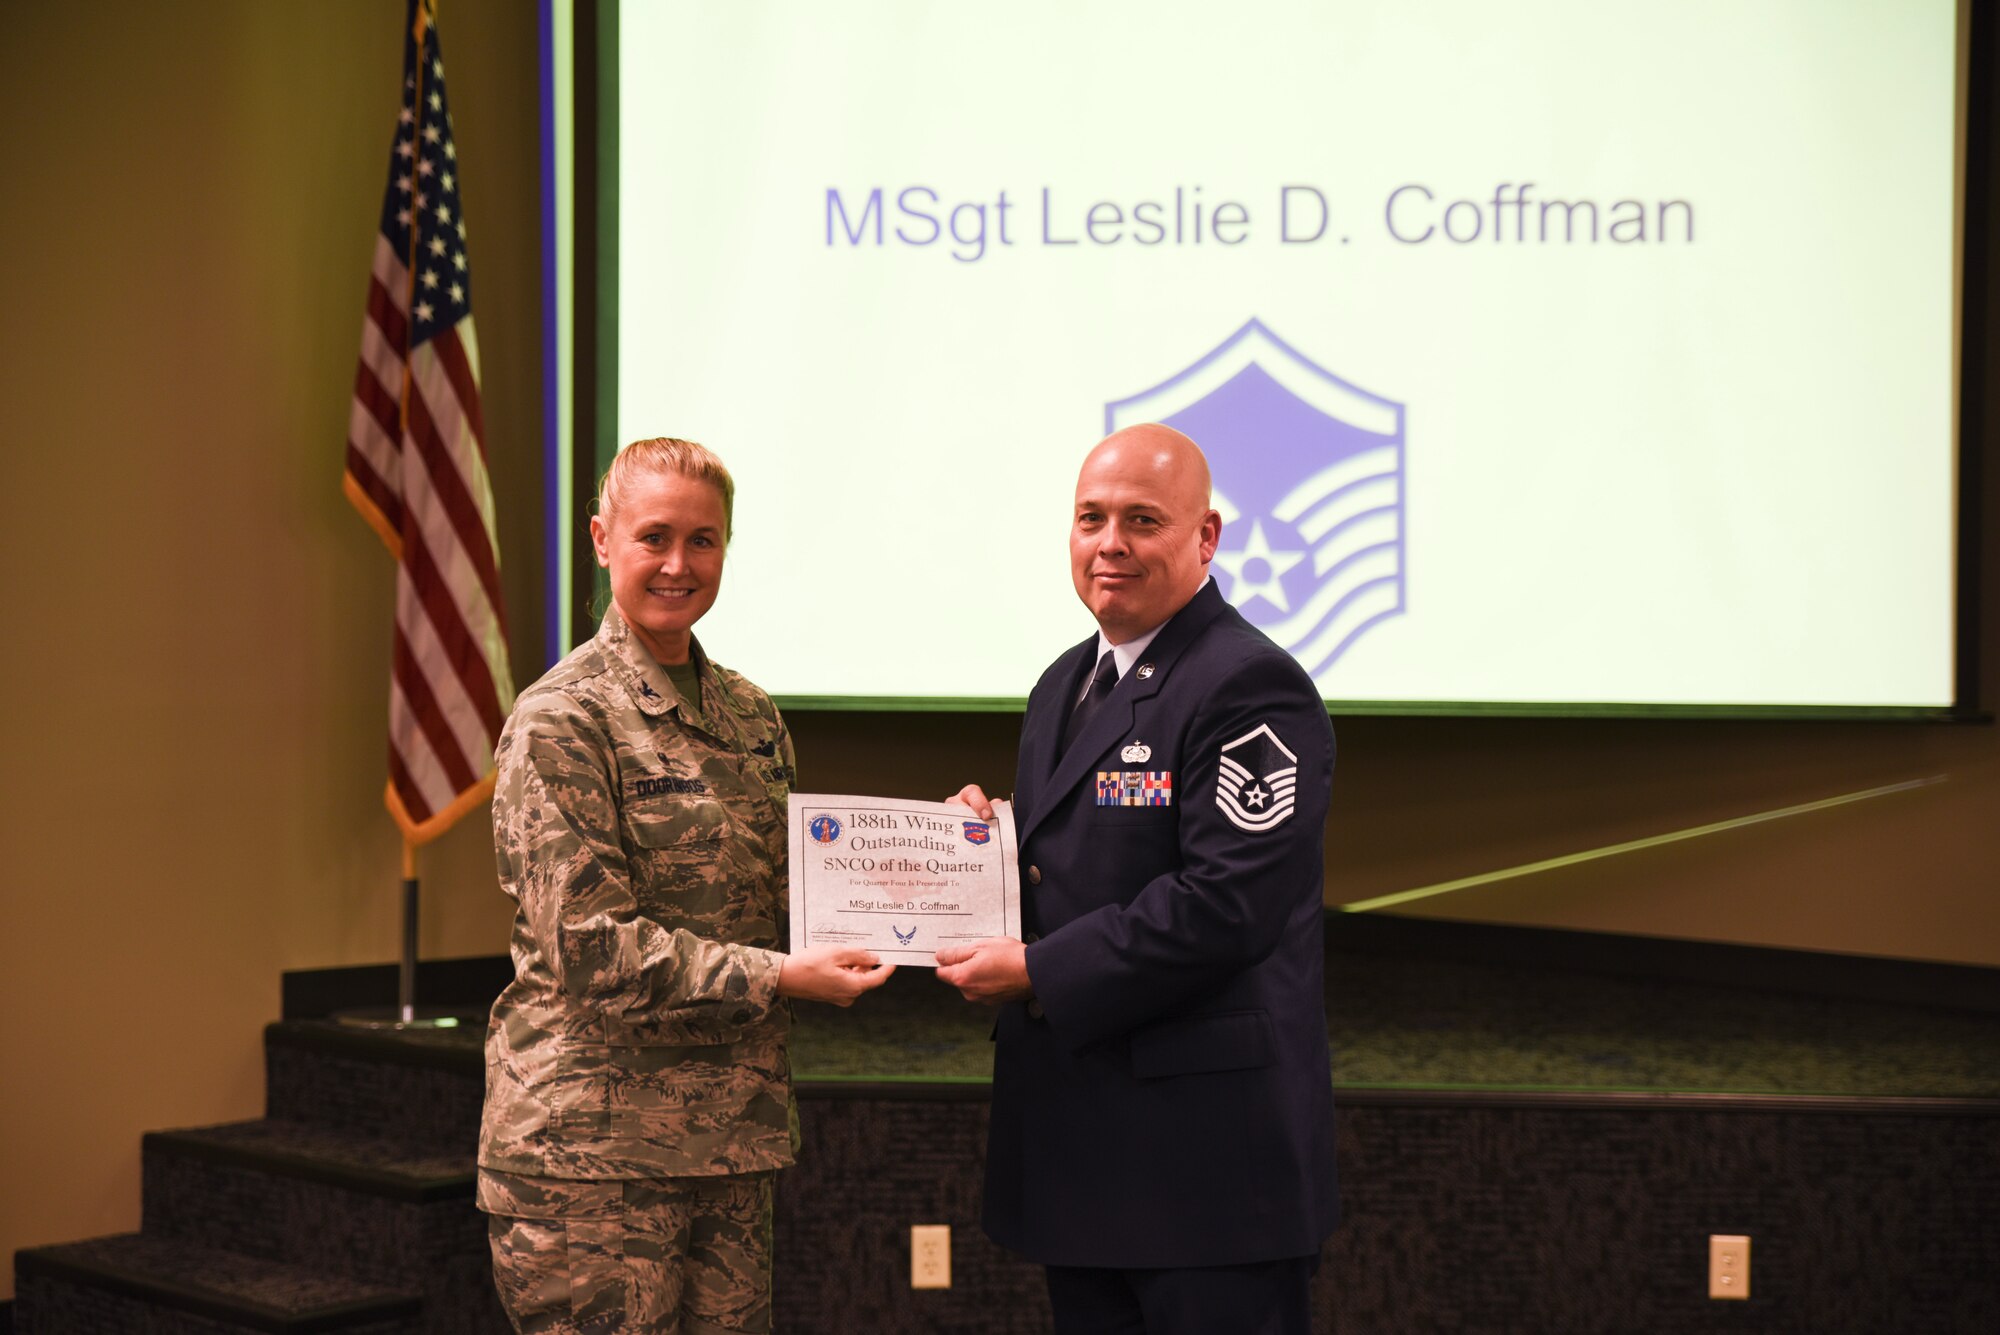 Master Sgt. Leslie Coffman is presented the certificate for his selection as the Senior Noncommissioned Officer of the Quarter by Col. Bobbi Doorenbos, 188th Wing Commander, during a commander's call held Dec. 5, 2015. Nineteen Airmen of the Quarter nominees were recognized for their exceptional service to the wing during the last quarter that distinguished themselves among their peers in the 188th. Winners were selected in the Airman, Noncommissioned Officer, Senior NCO, Company Grade Officer and Field Grade Officer categories. (U.S. Air National Guard photo by Capt. Holli Nelson/released)